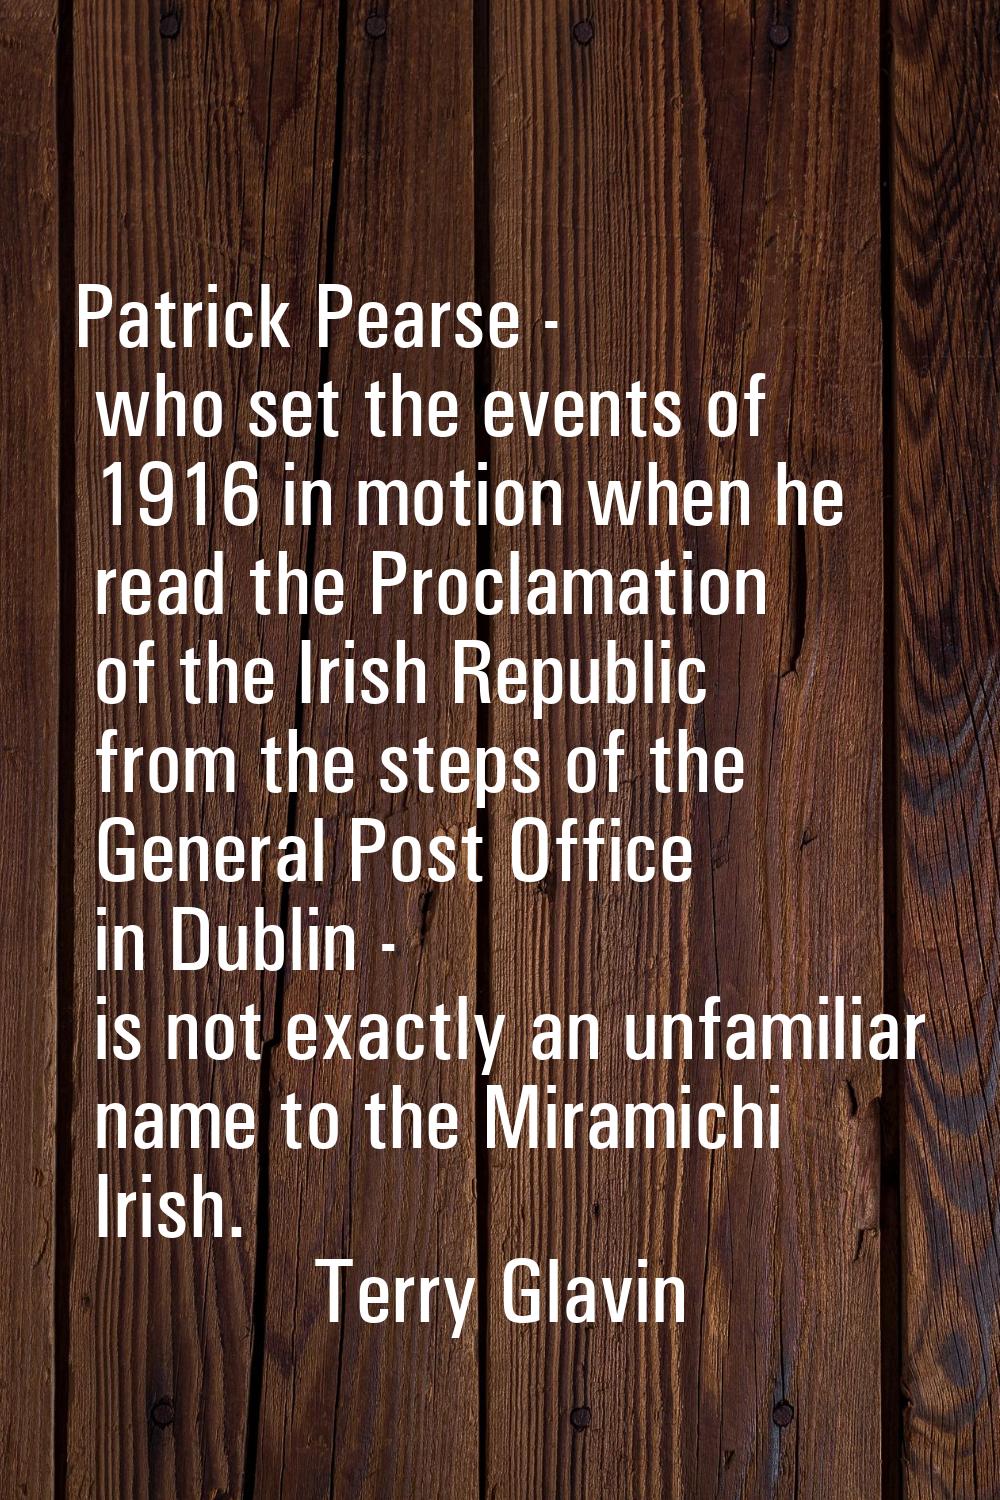 Patrick Pearse - who set the events of 1916 in motion when he read the Proclamation of the Irish Re